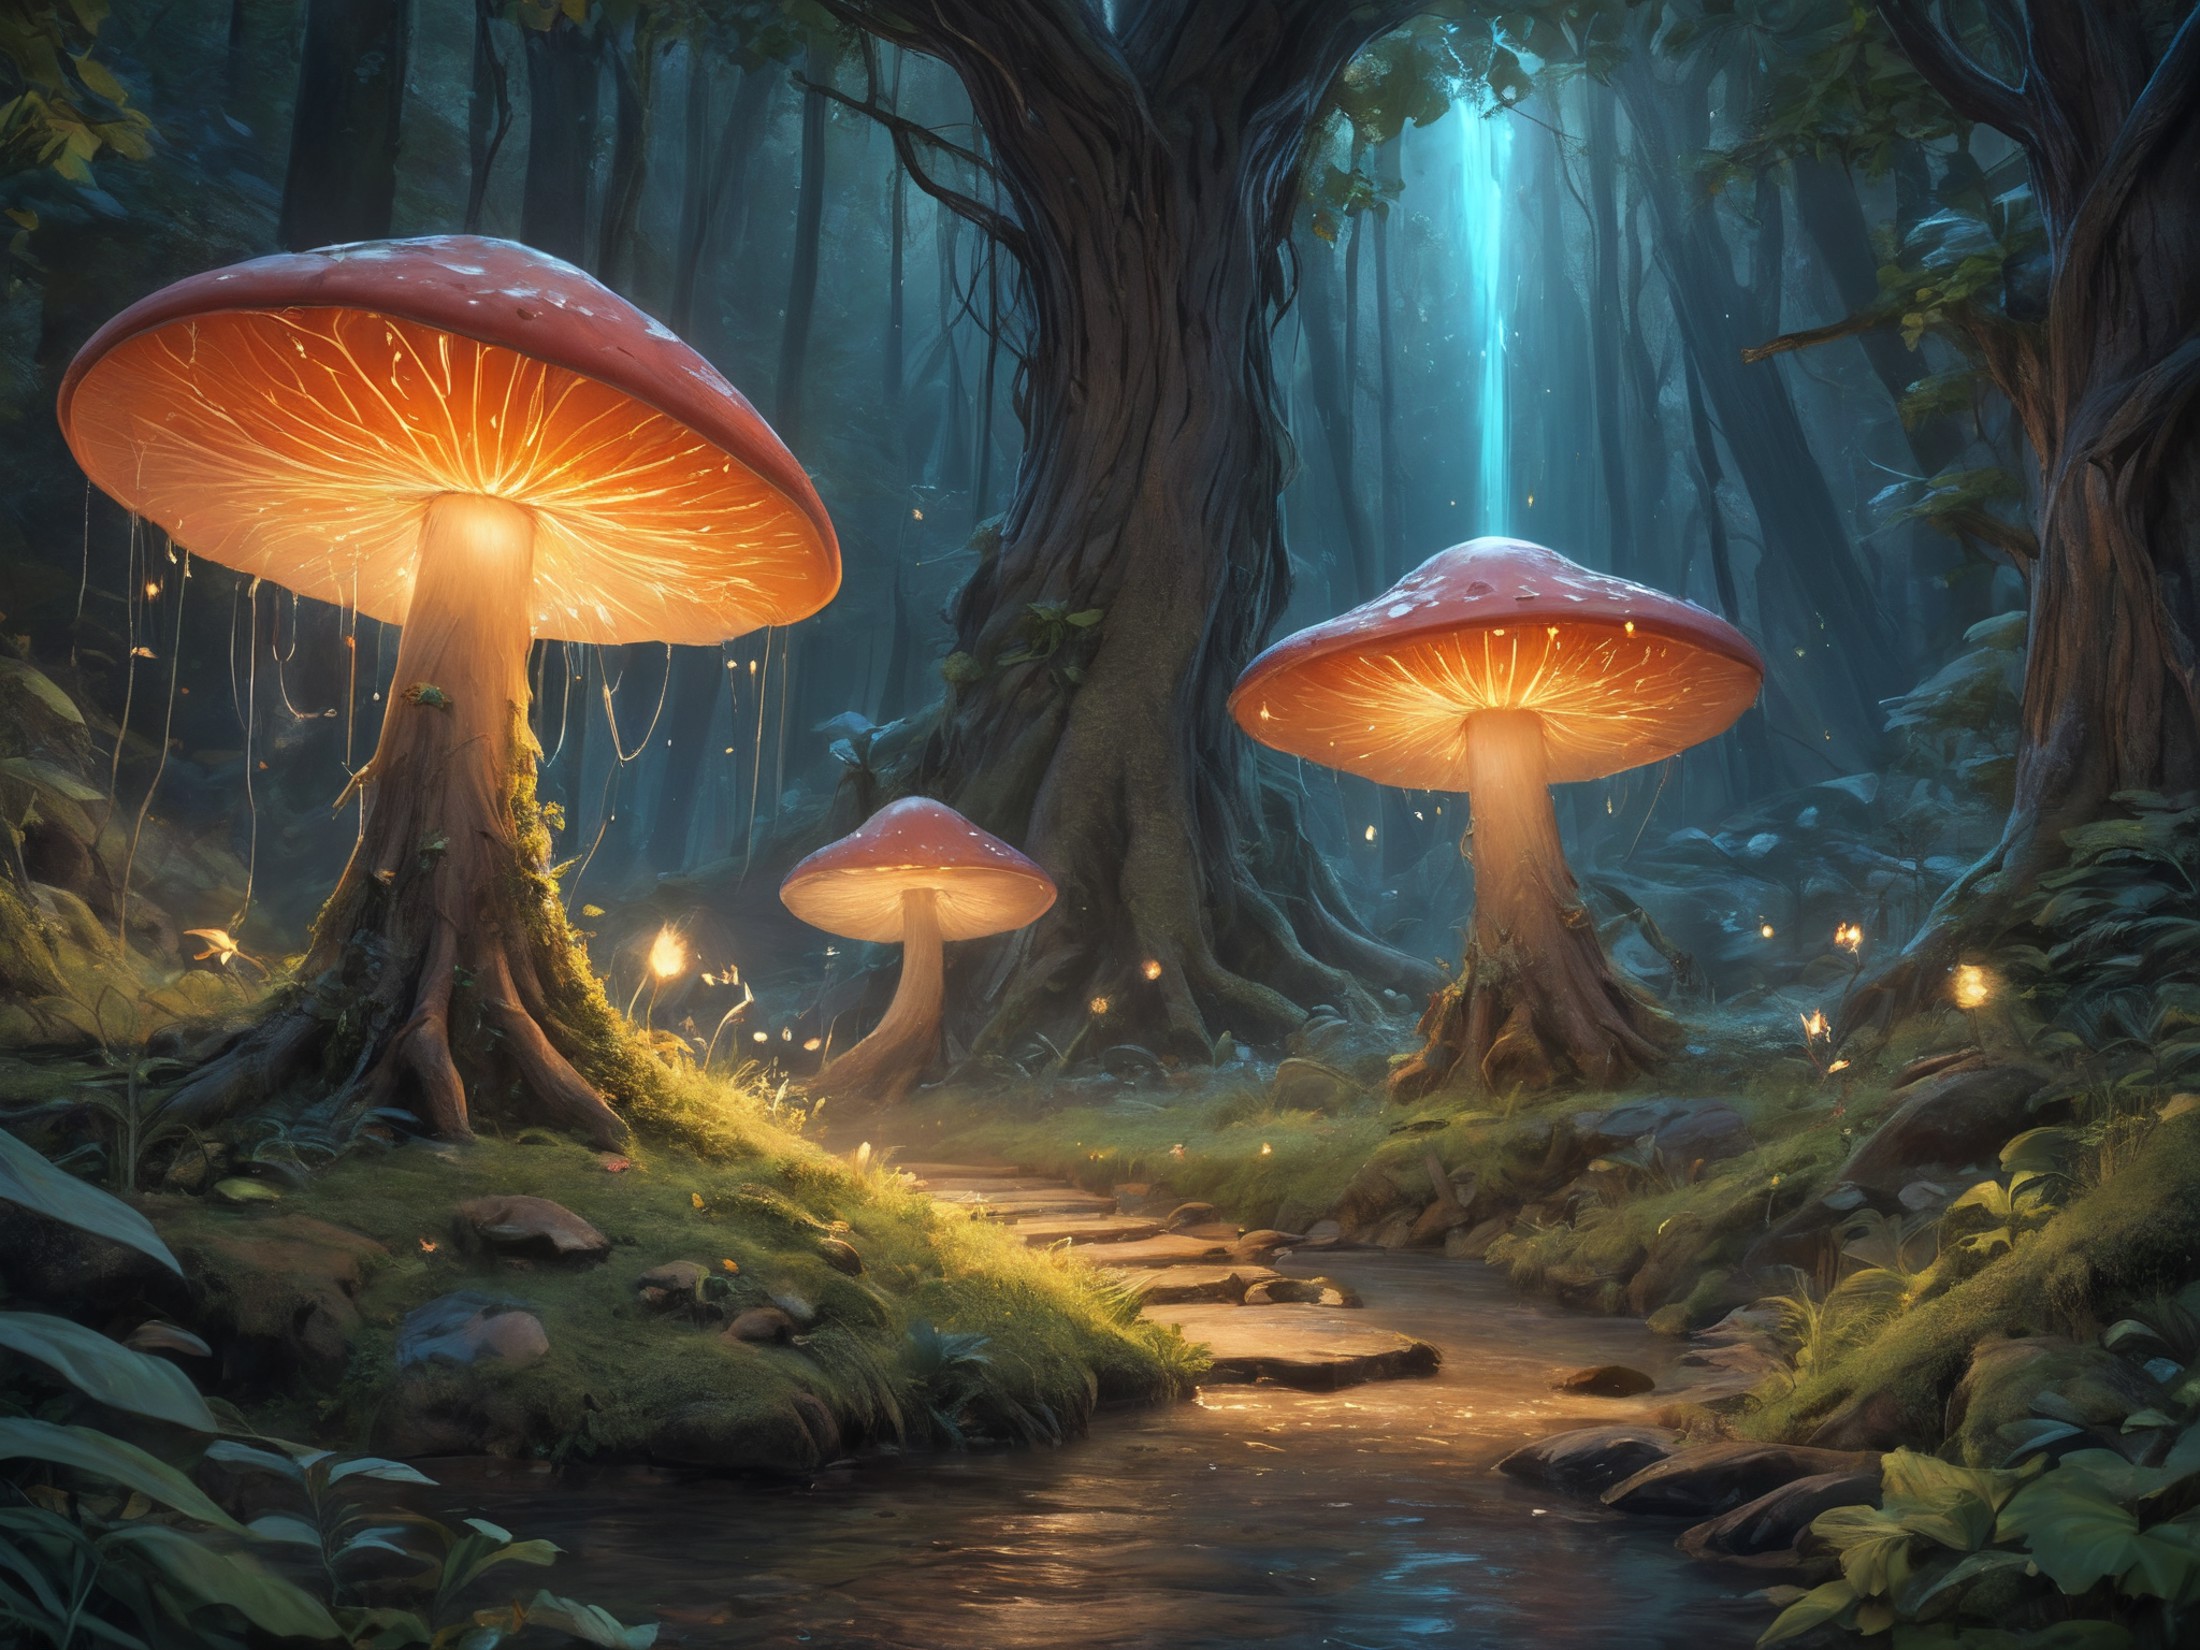 ethereal fantasy concept art of A mystical forest at night, with glowing mushrooms and fireflies illuminating the trees. I...